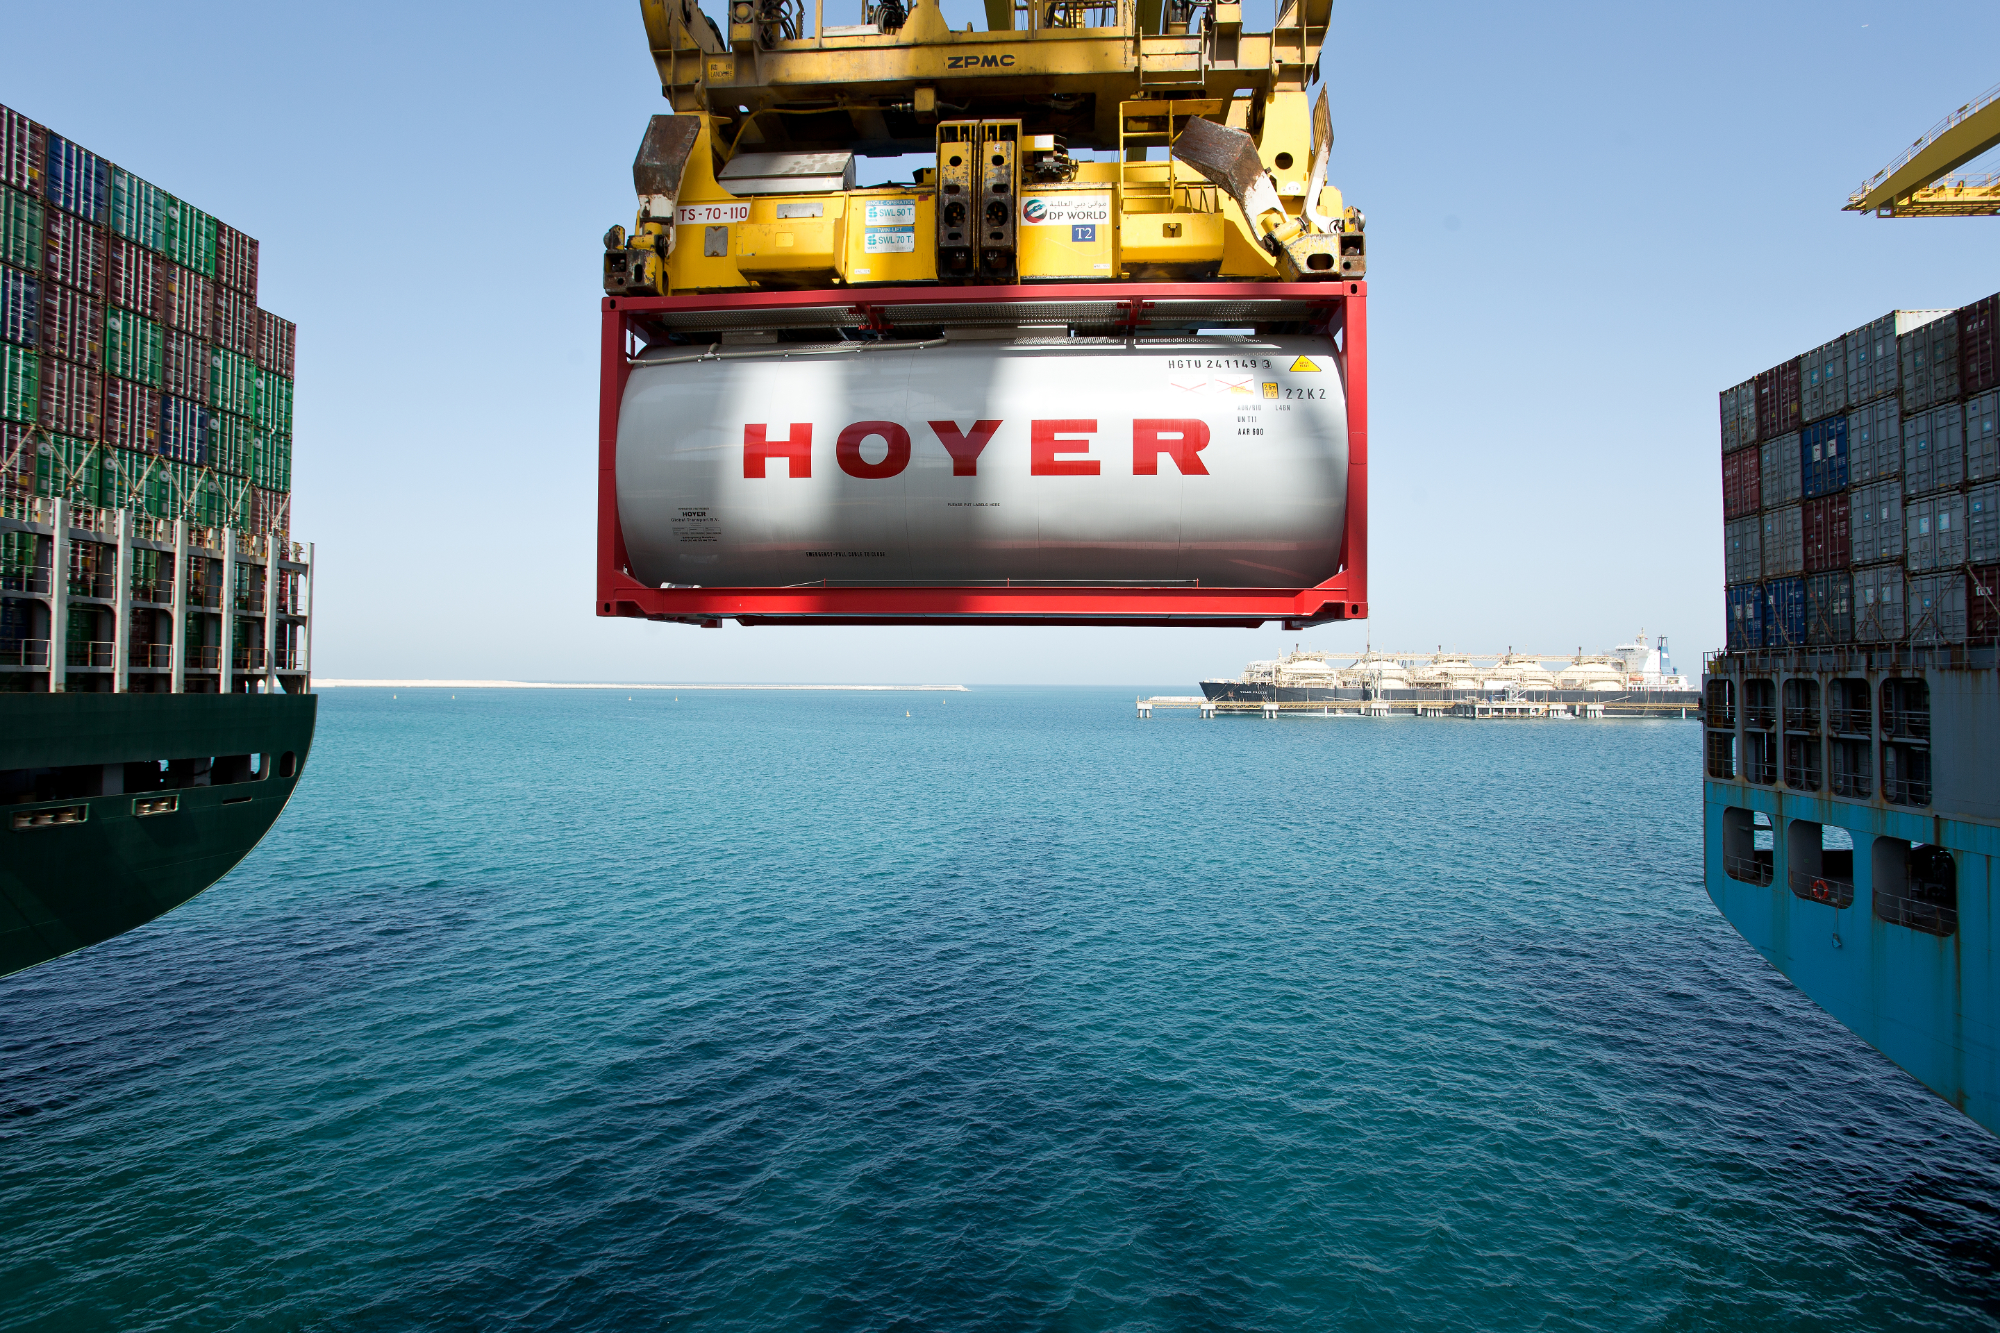 HOYER container on a crane at the harbour